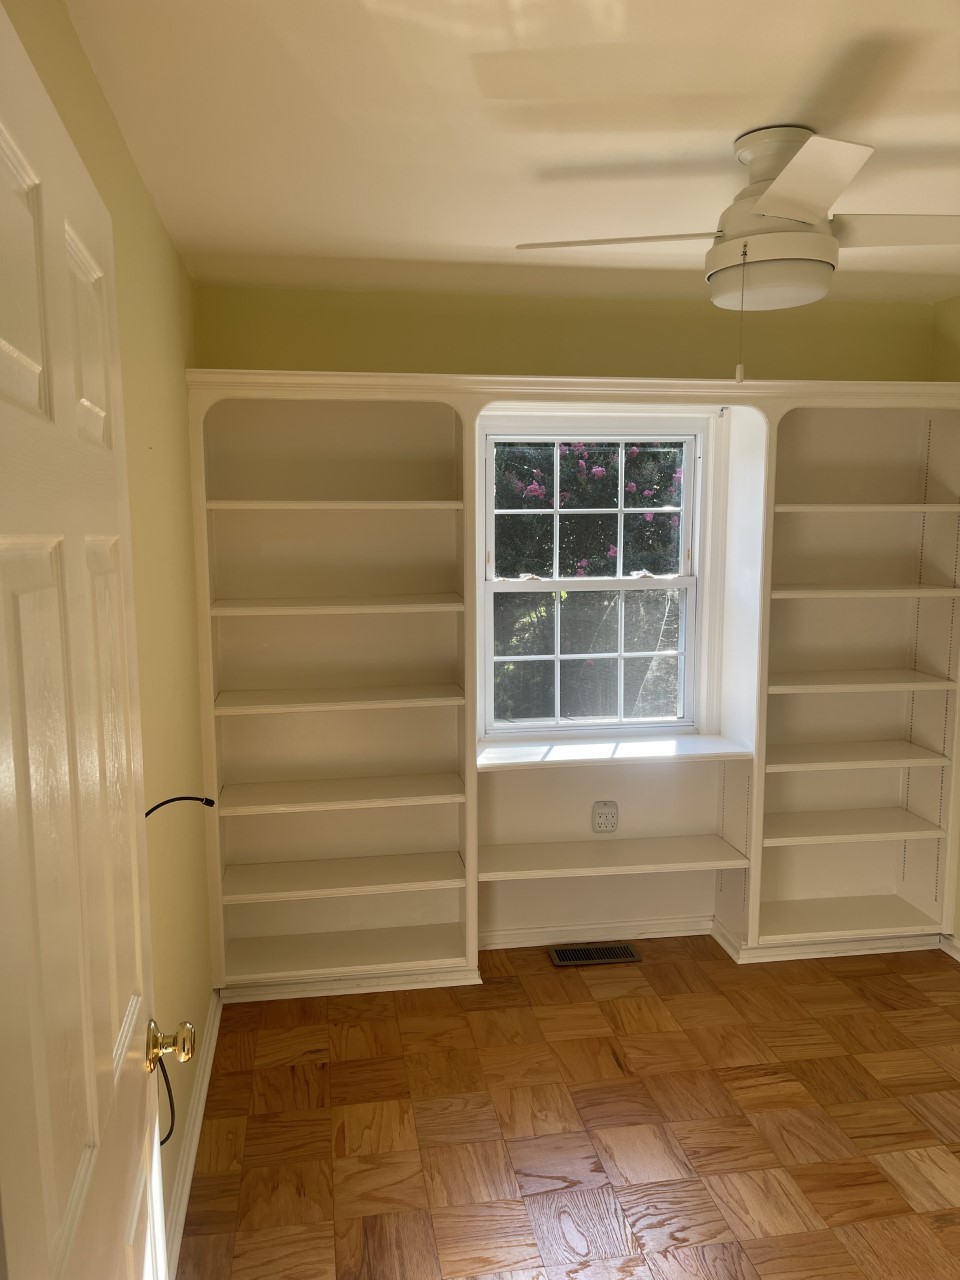 Upstairs Small Bedroom 2 with built in Shelving Unit